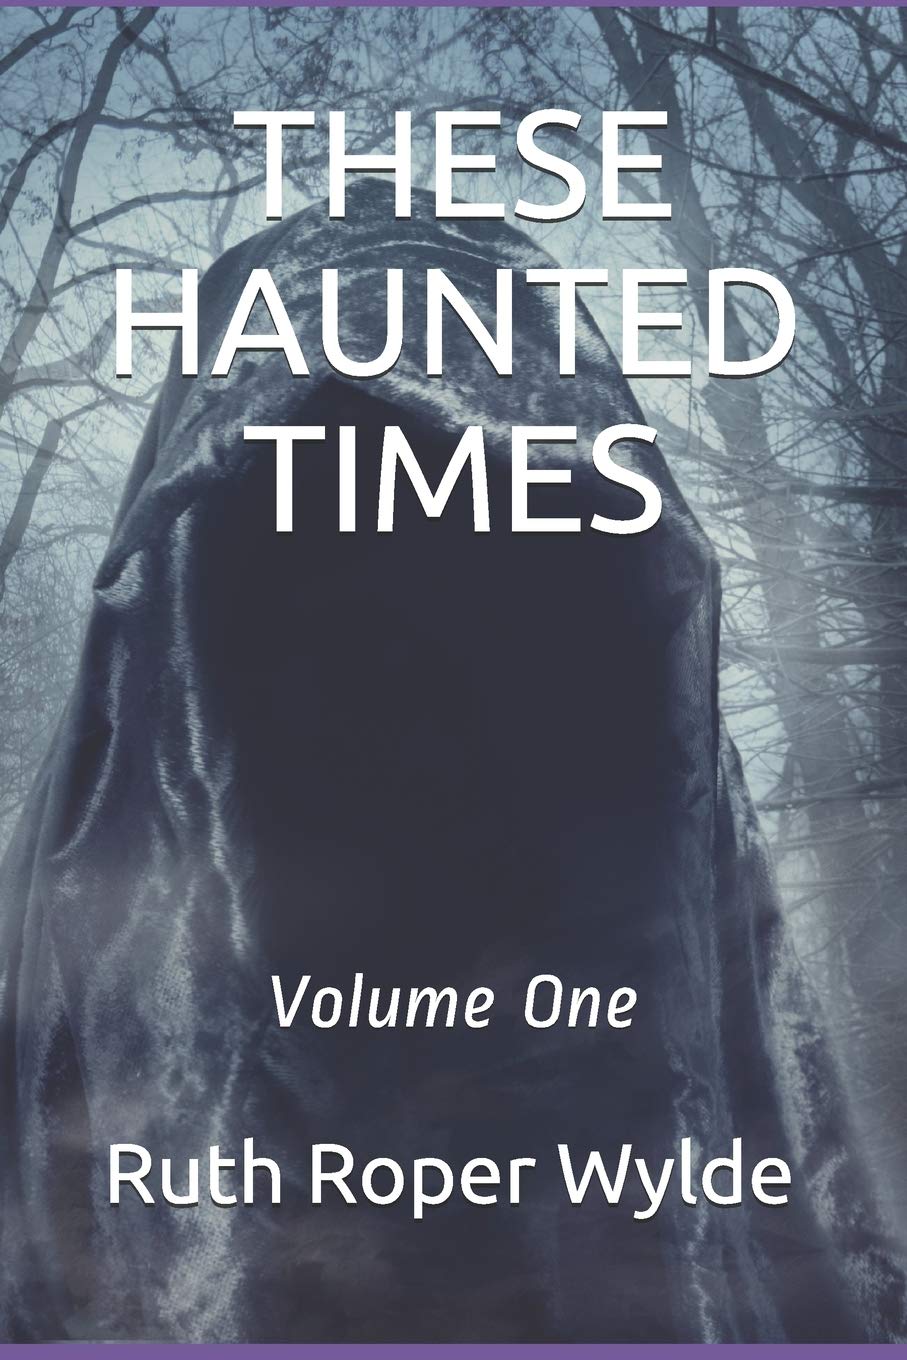 These Haunted Times Vol 1 by Ruth Roper Wylde